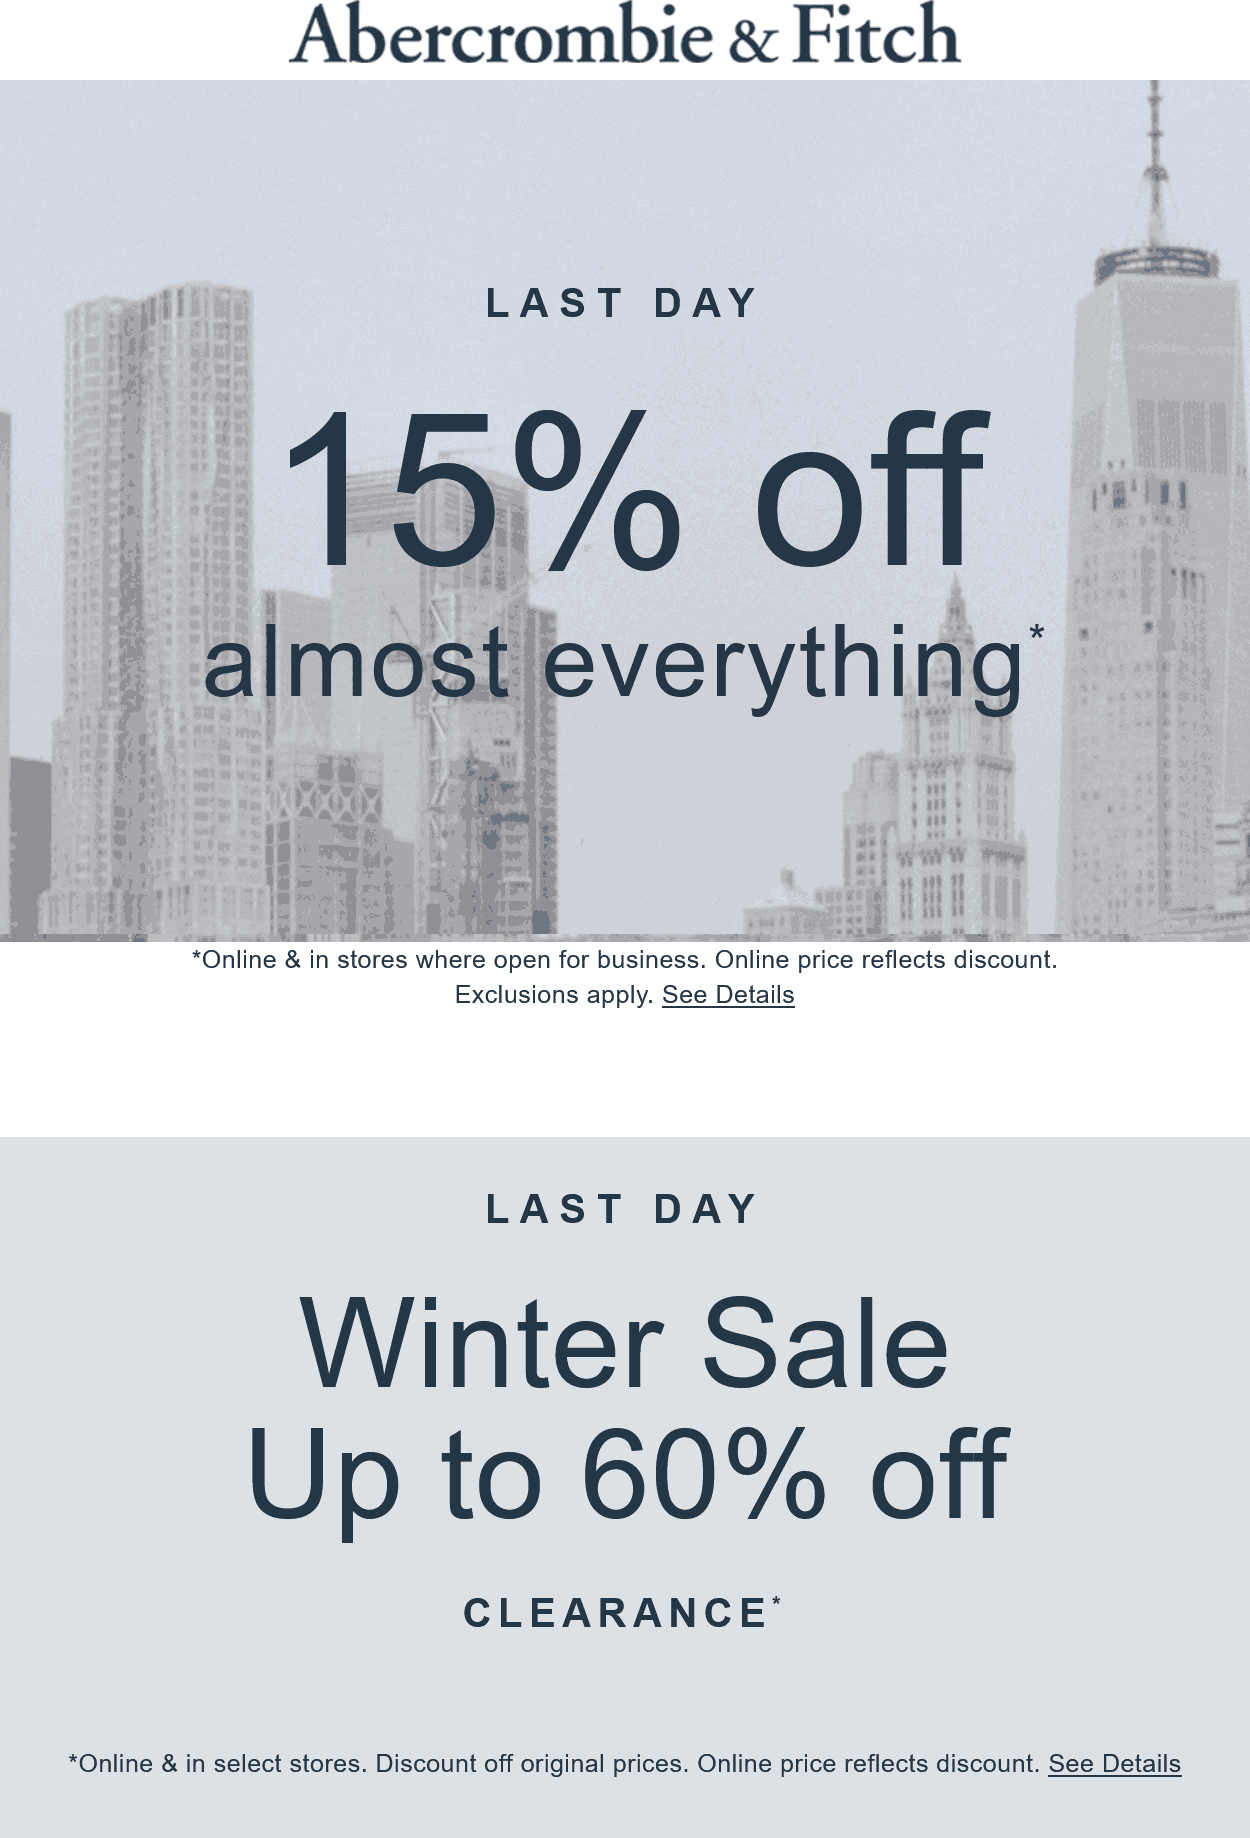 Abercrombie & Fitch stores Coupon  15% off today at Abercrombie & Fitch, ditto online #abercrombiefitch 